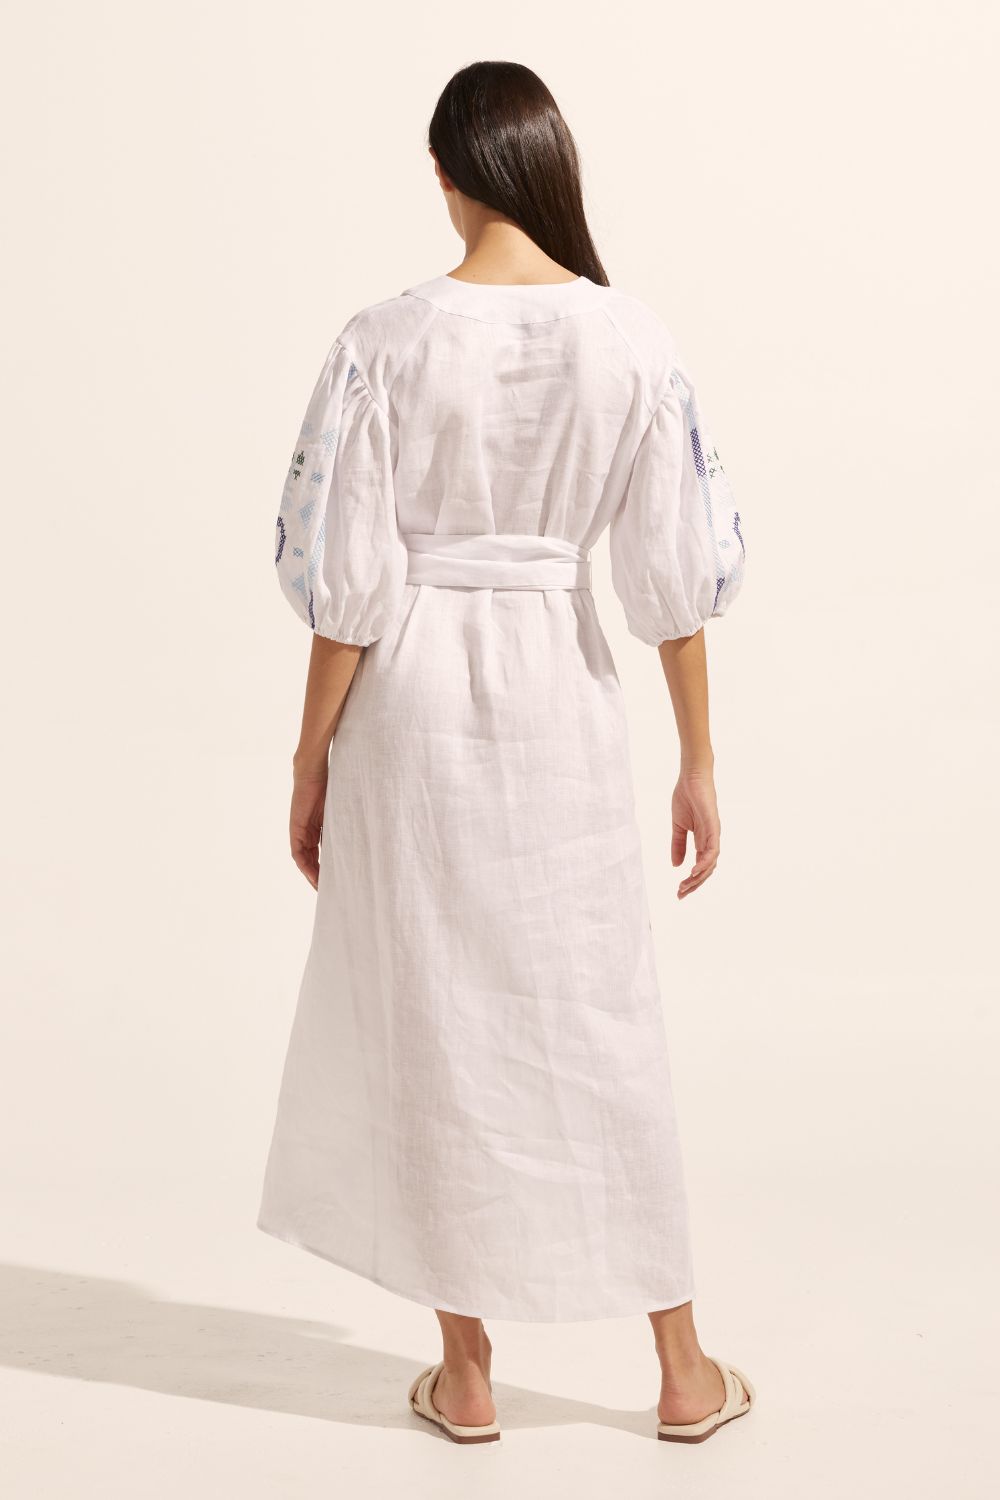 white and blue, maxi dress, embroidery, mid length sleeve, self tie fabric belt, back view image